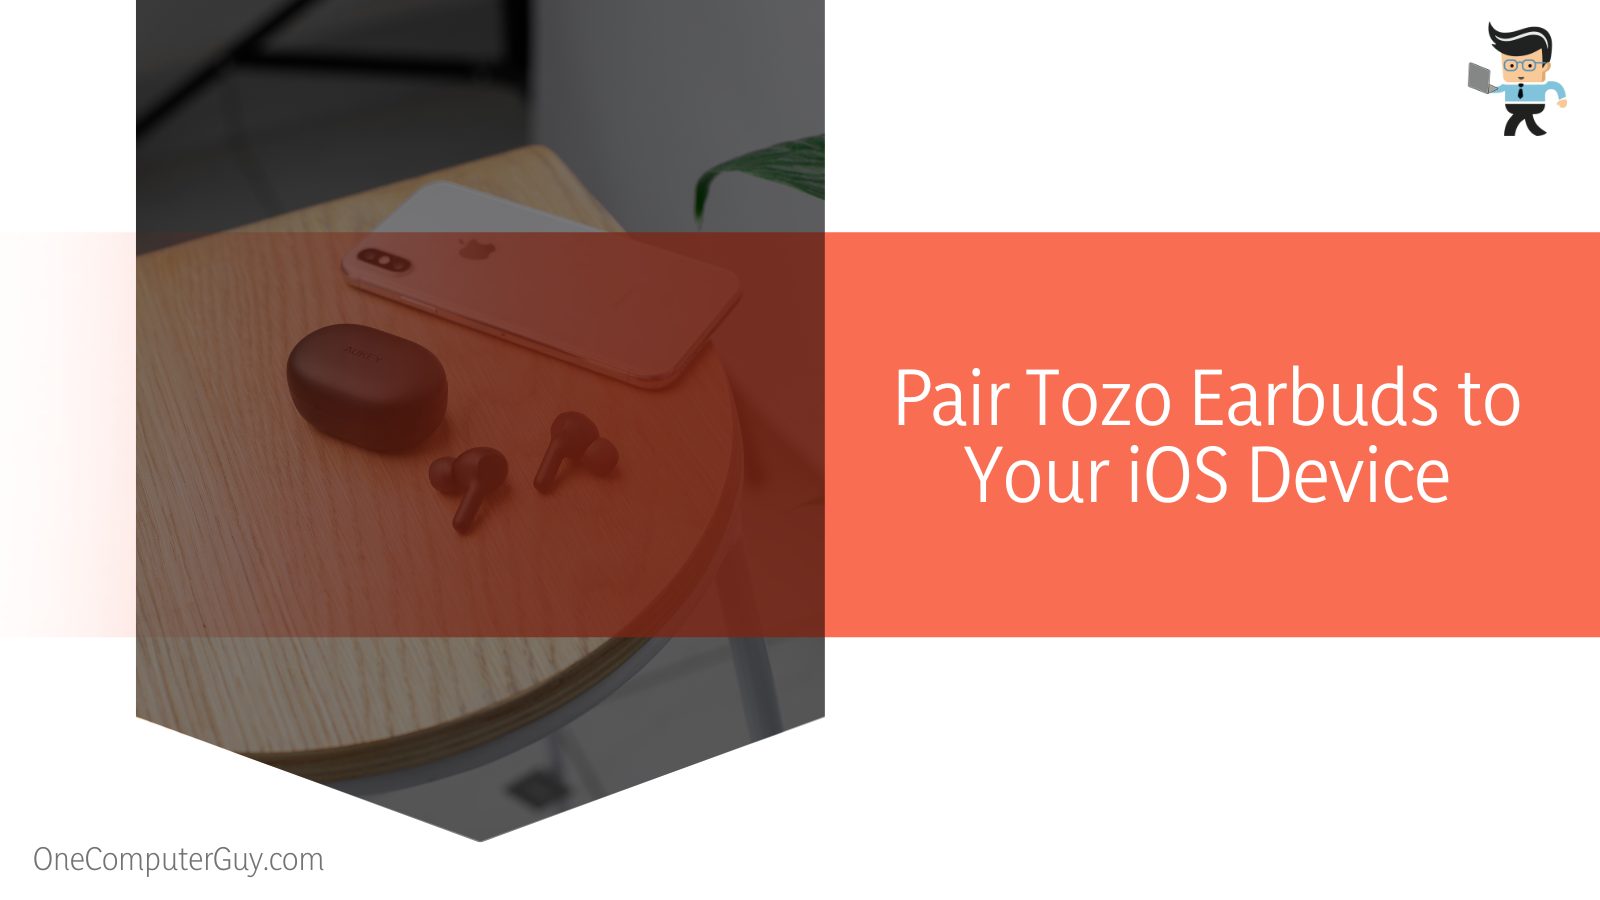 Pair Tozo Earbuds to Your iOS Device